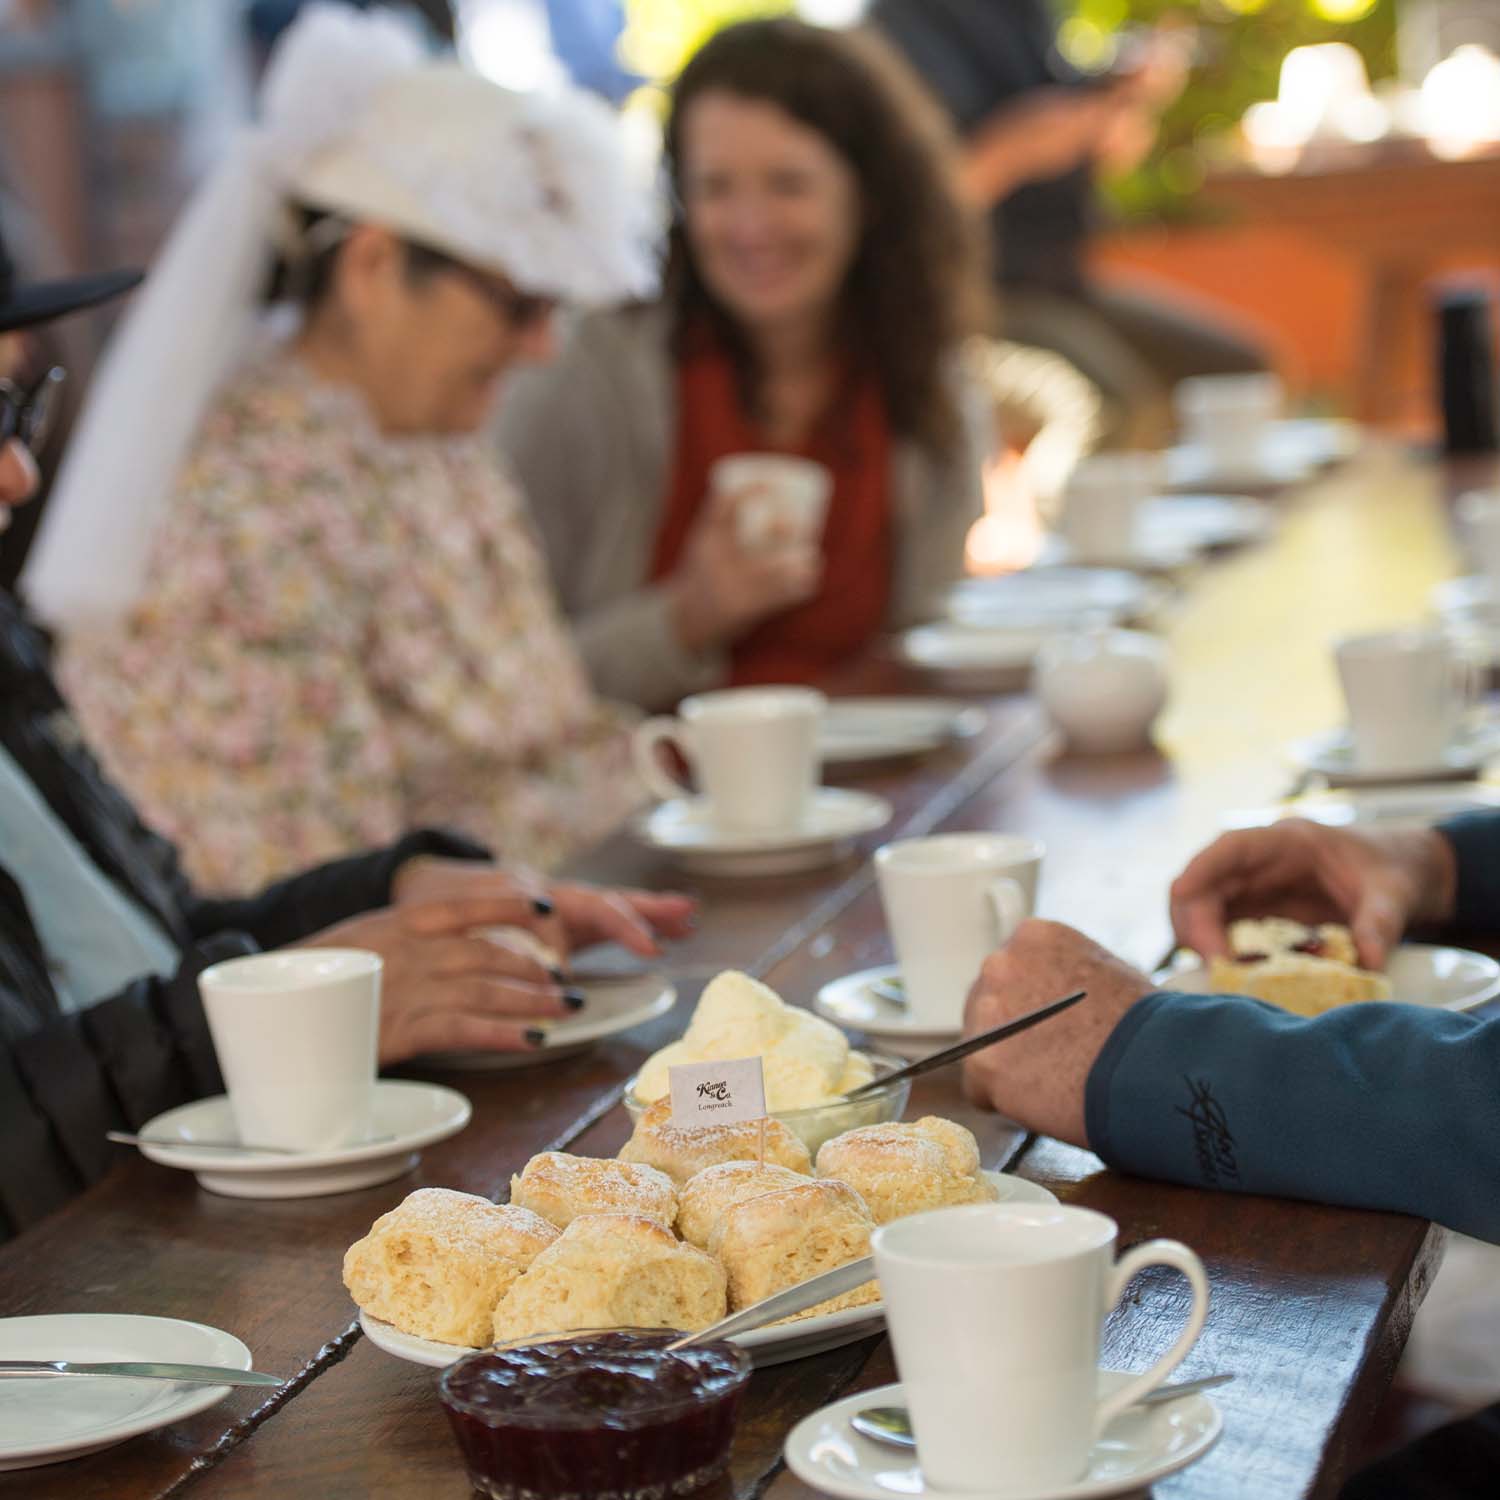 guests in the background out of focus enjoying brunch. The image is focussed on a plate of scones